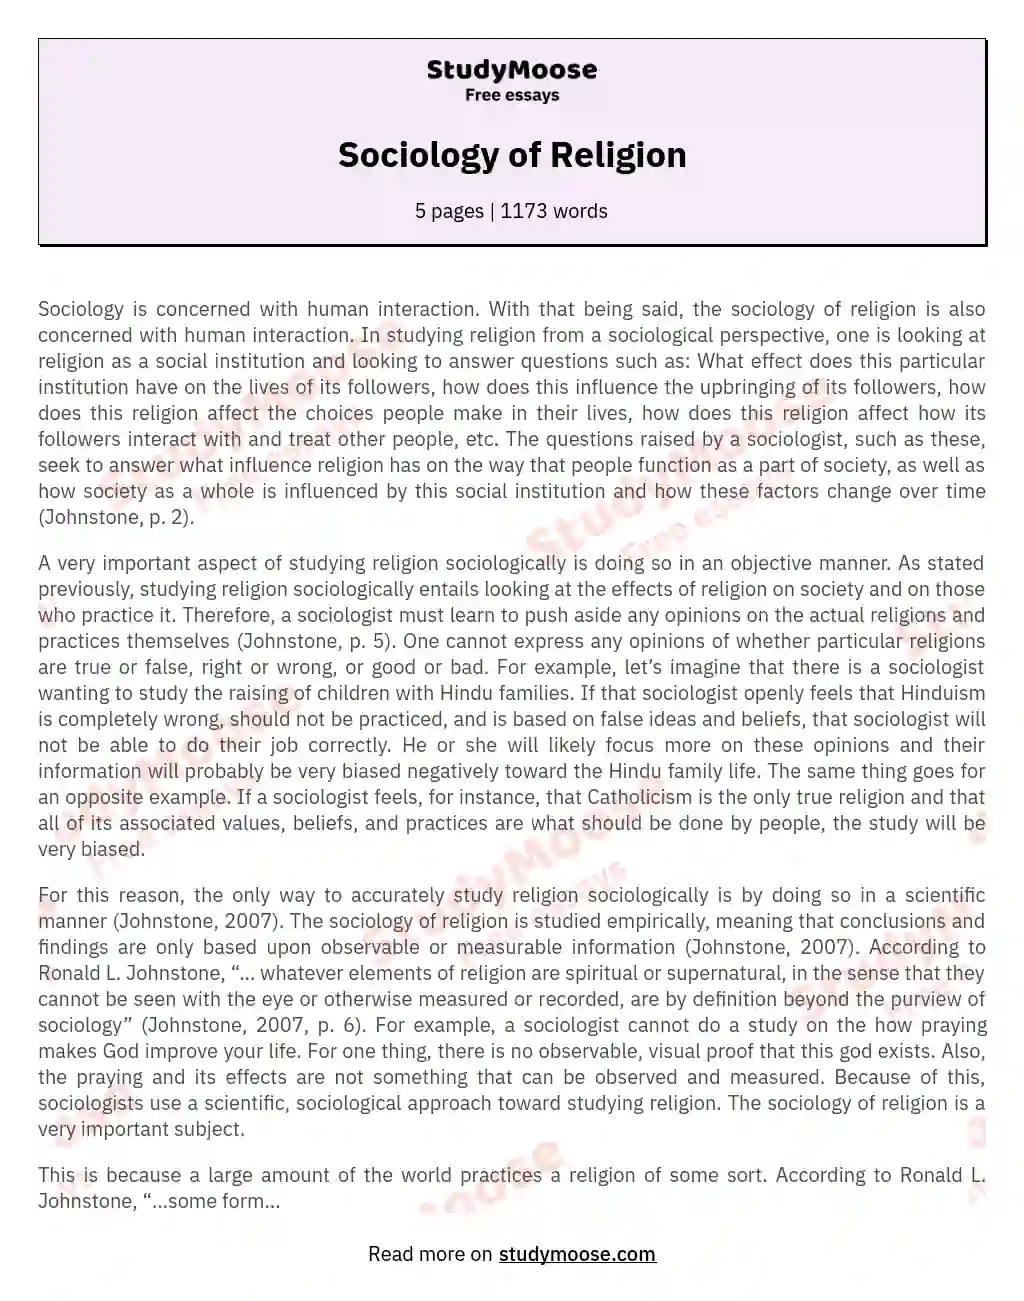 essays on the sociology of religion